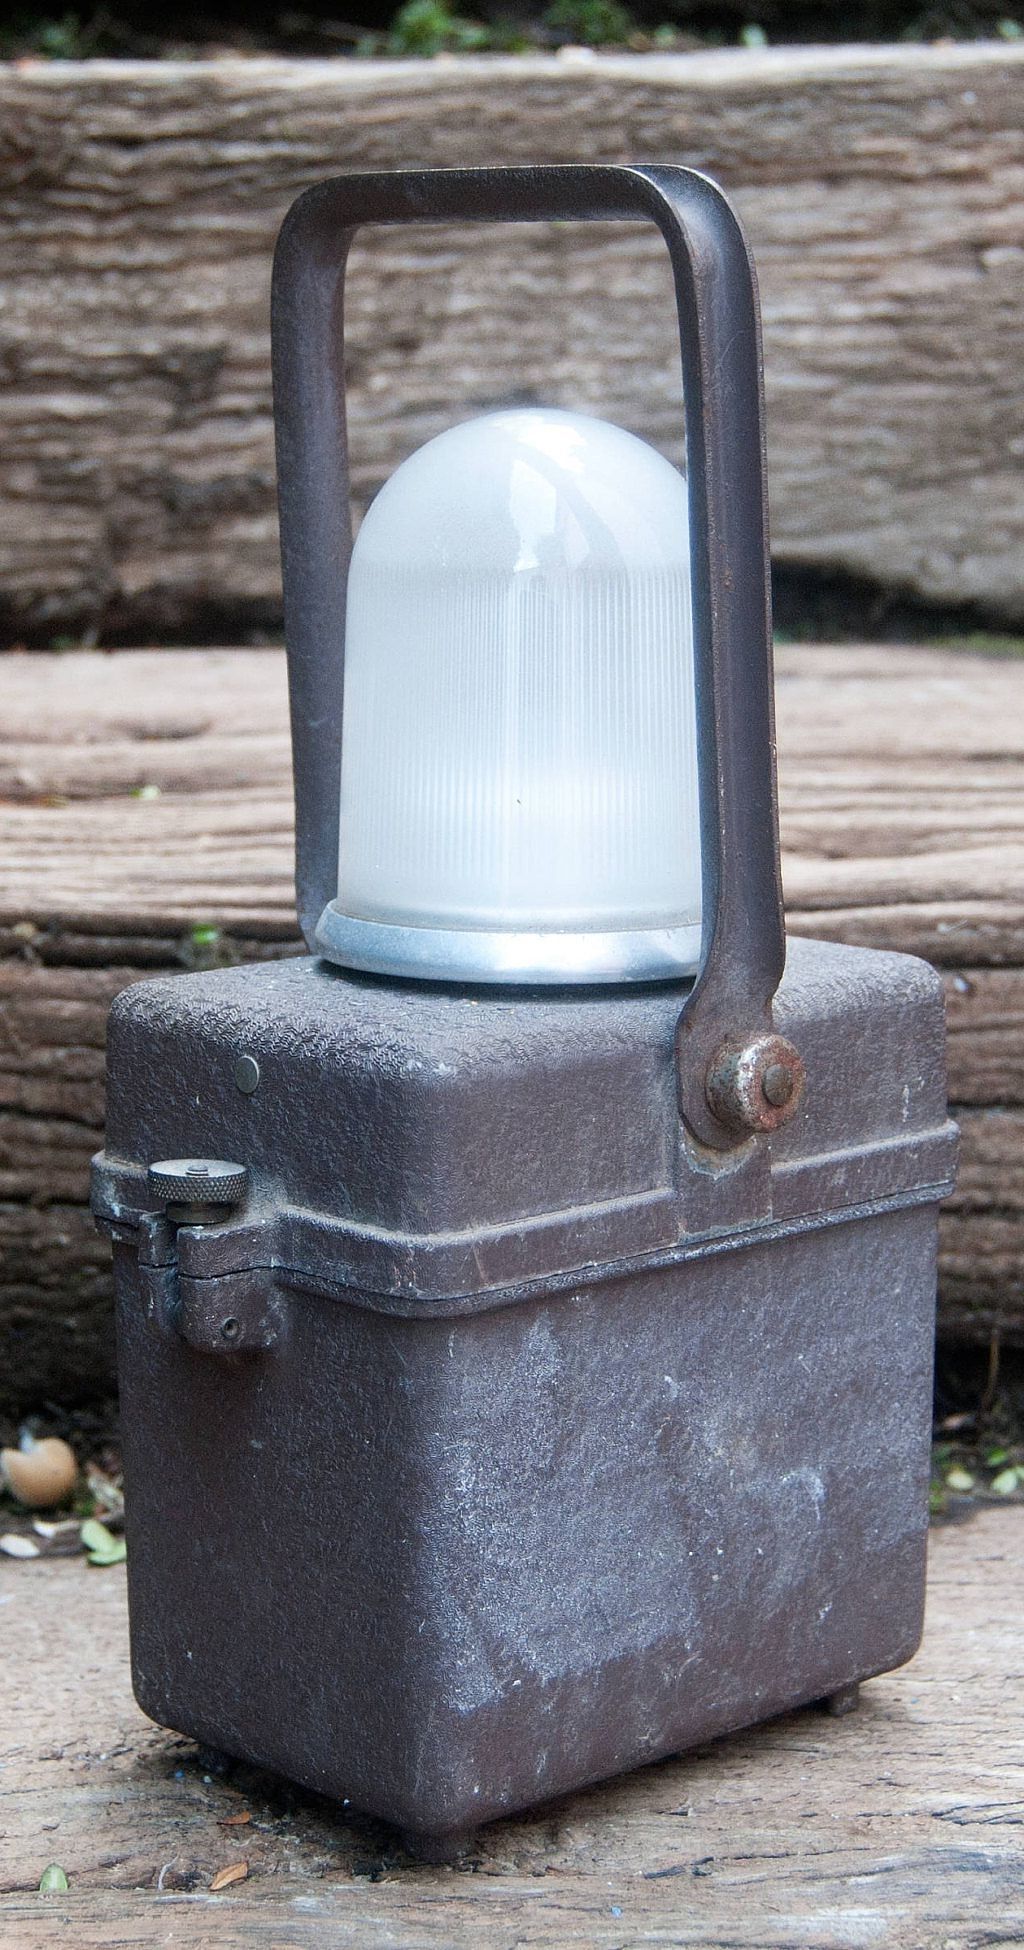 Outdoor Railroad Lanterns For Most Up To Date Metal Lantern, Industrial Lantern, Railroad Home Decor, Rustic (View 3 of 20)